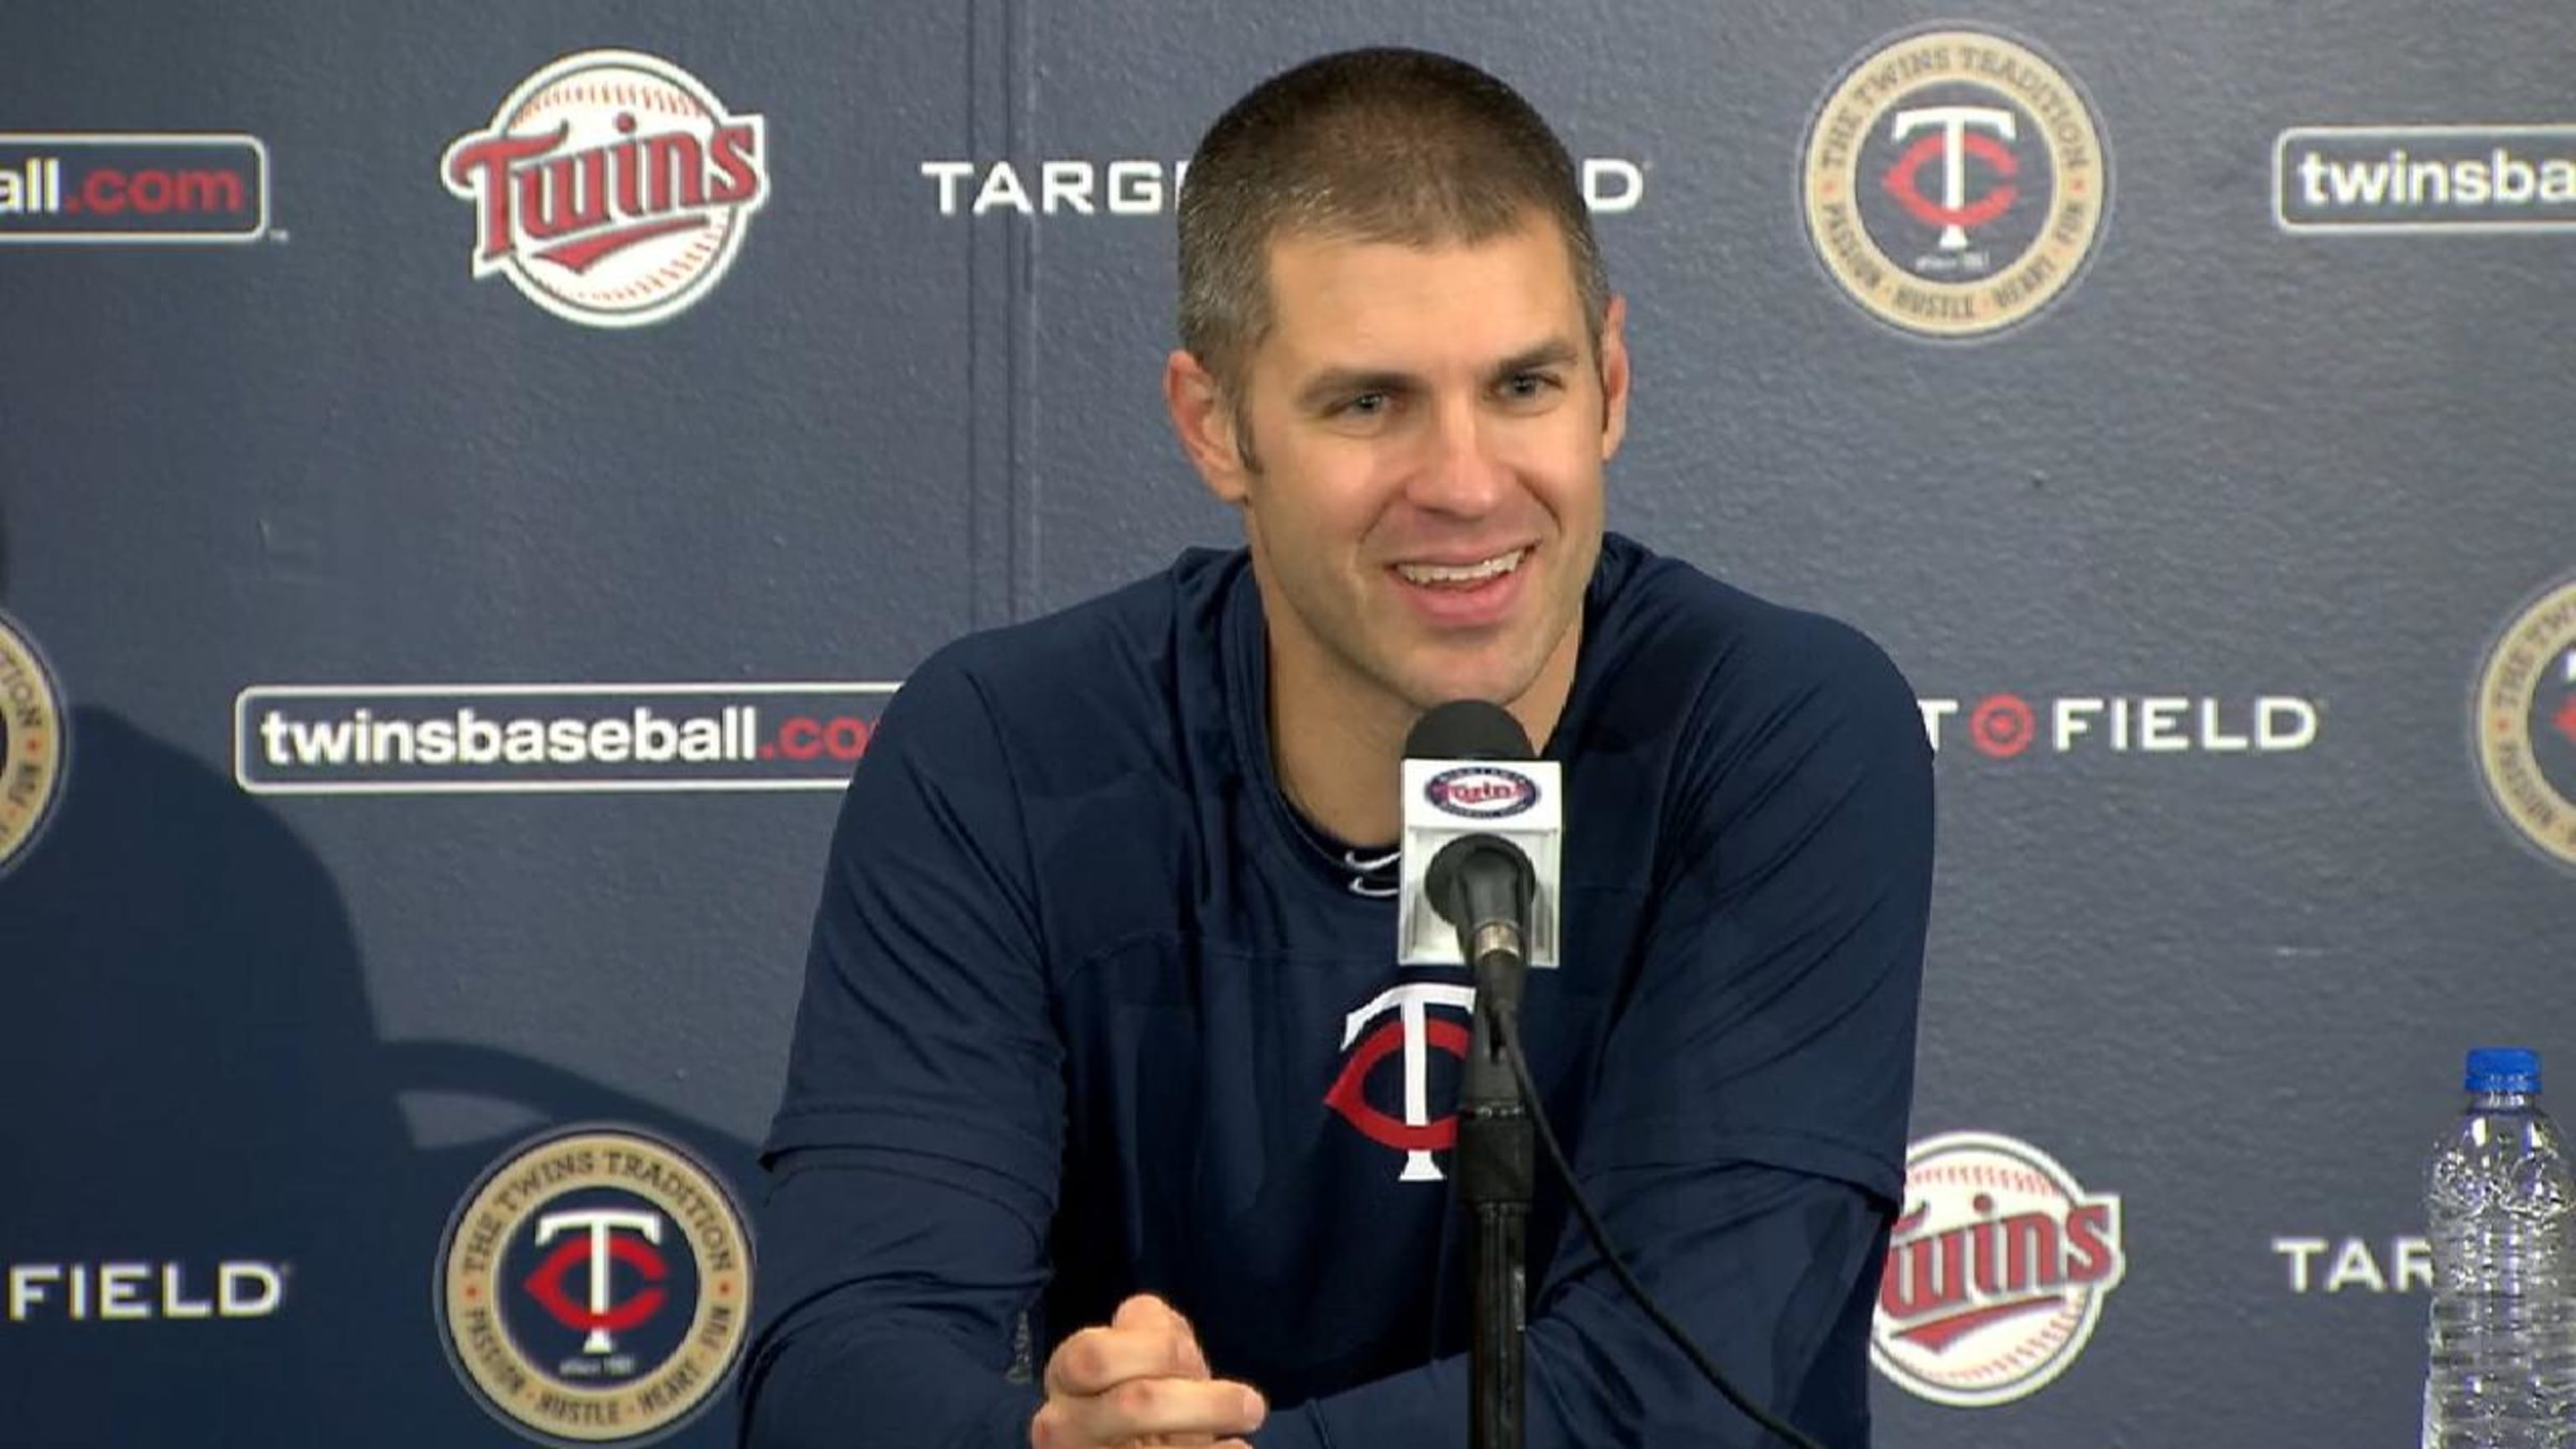 Is Joe Mauer's doppelganger playing in the NCAA tournament?